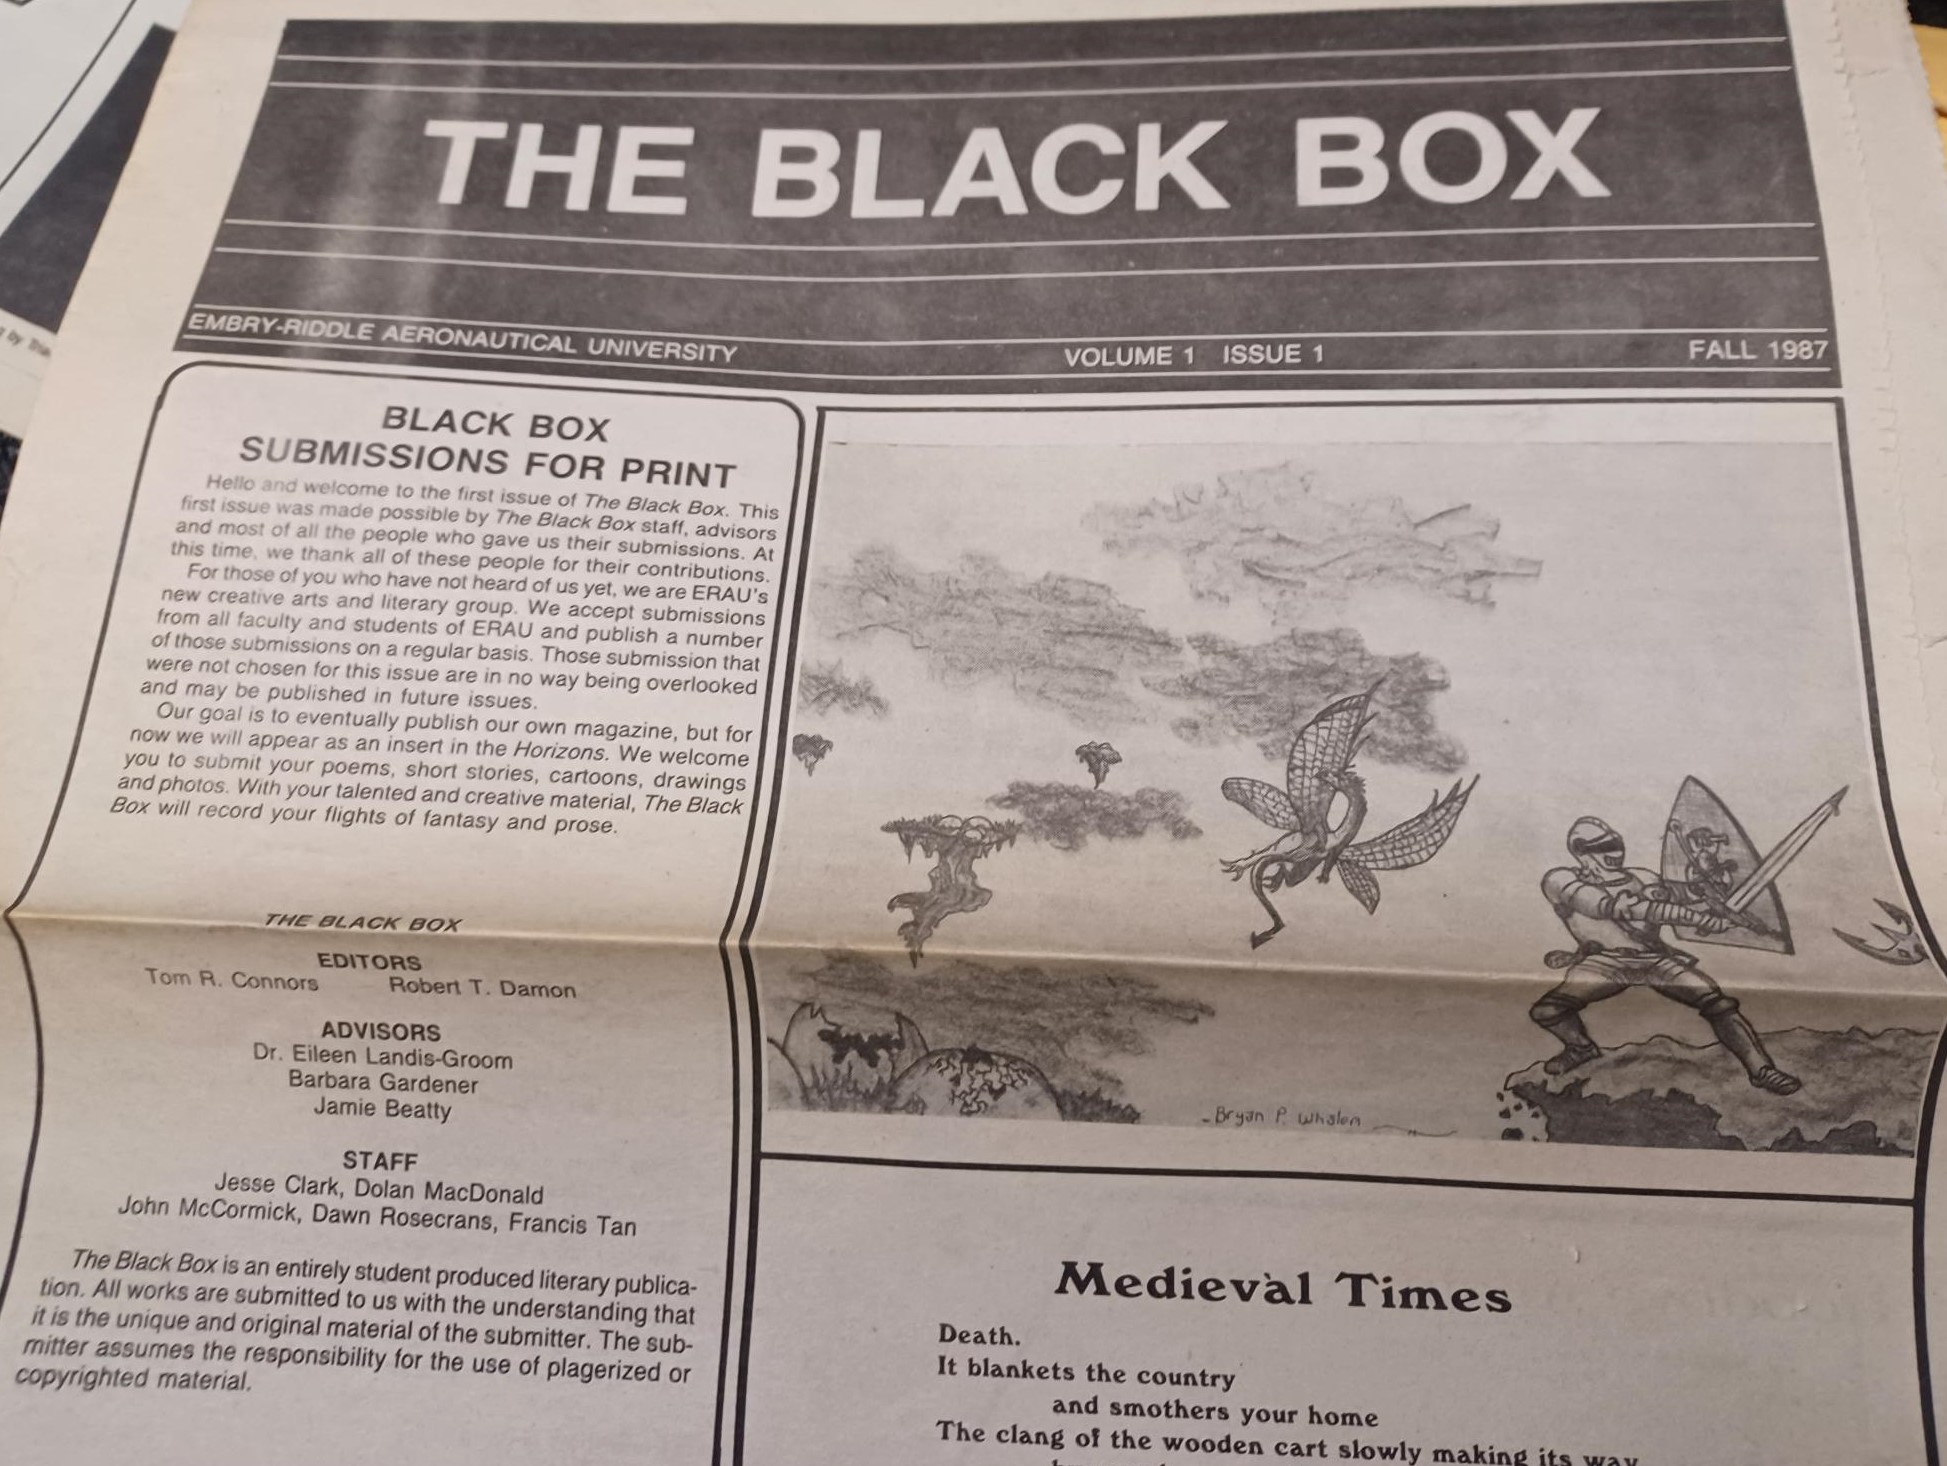 The front page of the first installment of The Black Box literary publication, included as an insert with the student newspaper.